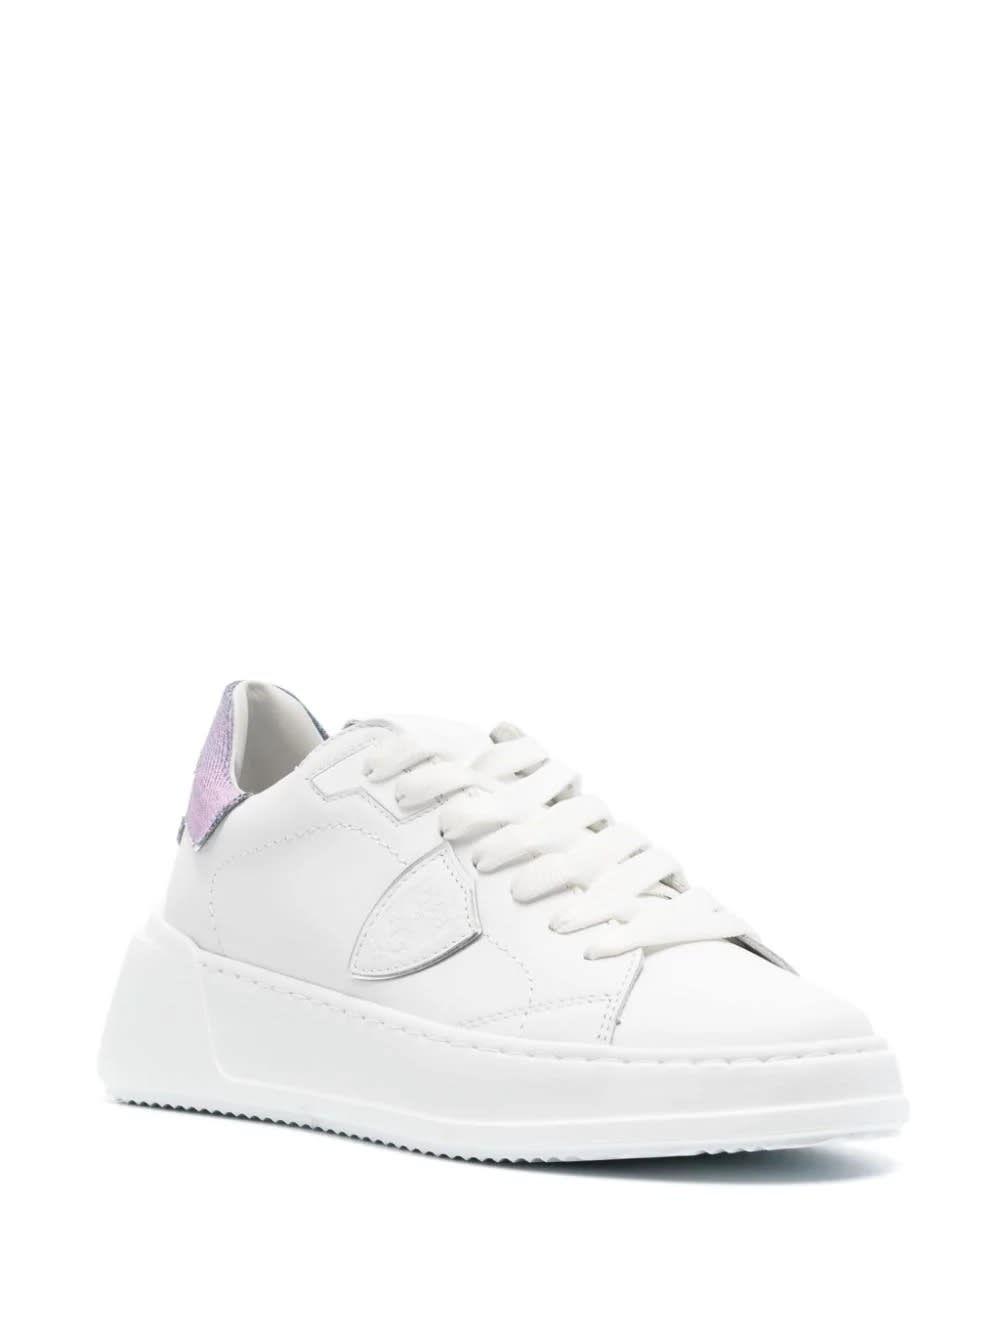 Shop Philippe Model Tres Temple Sneakers - White And Light Blue